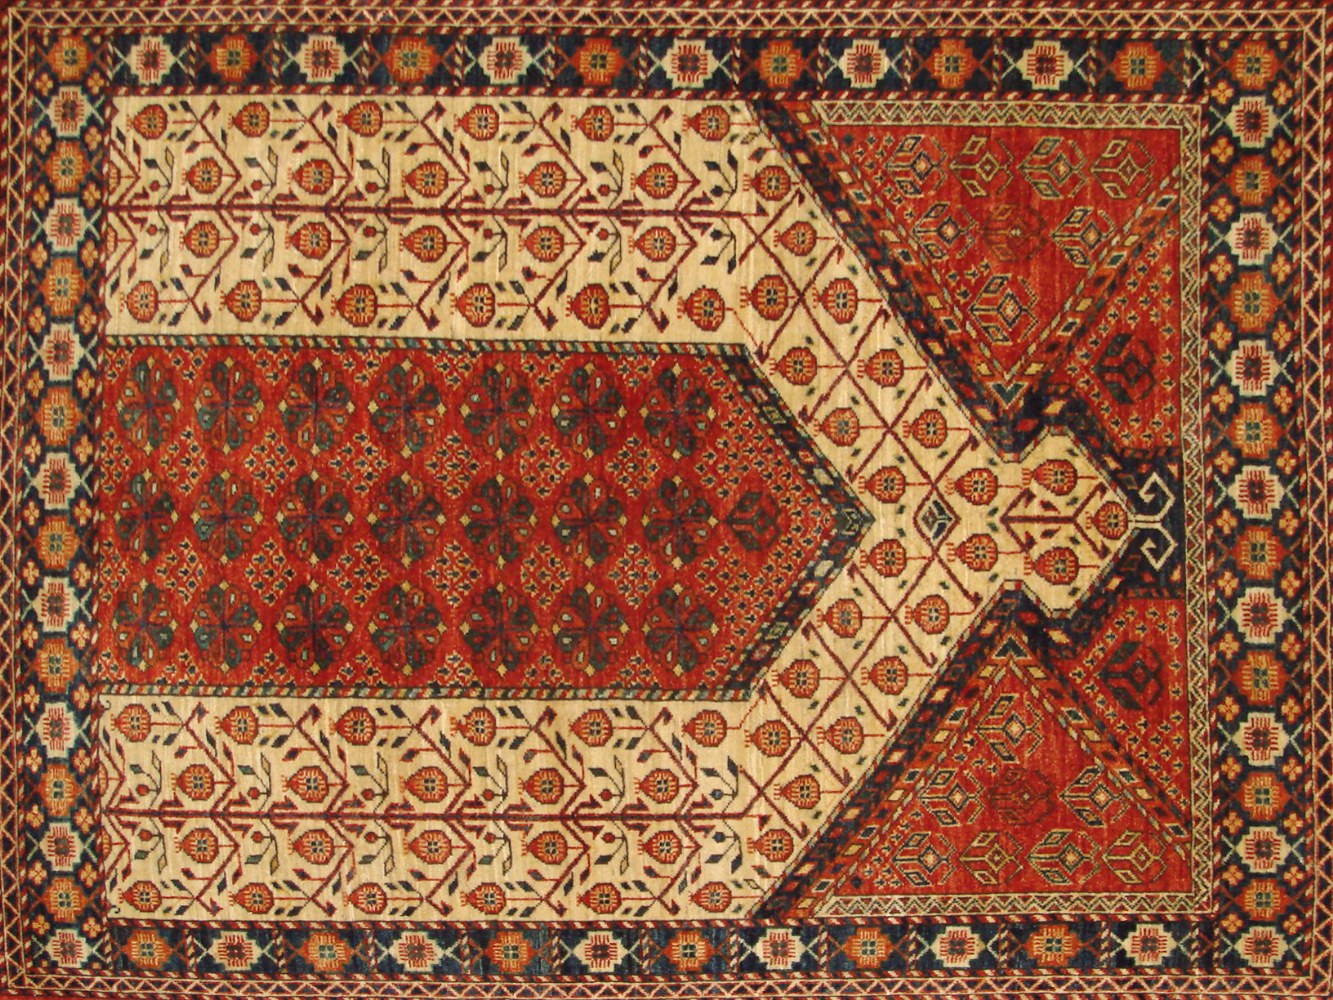 4x6 Antique Revival Hand Knotted Wool Area Rug - MR20896